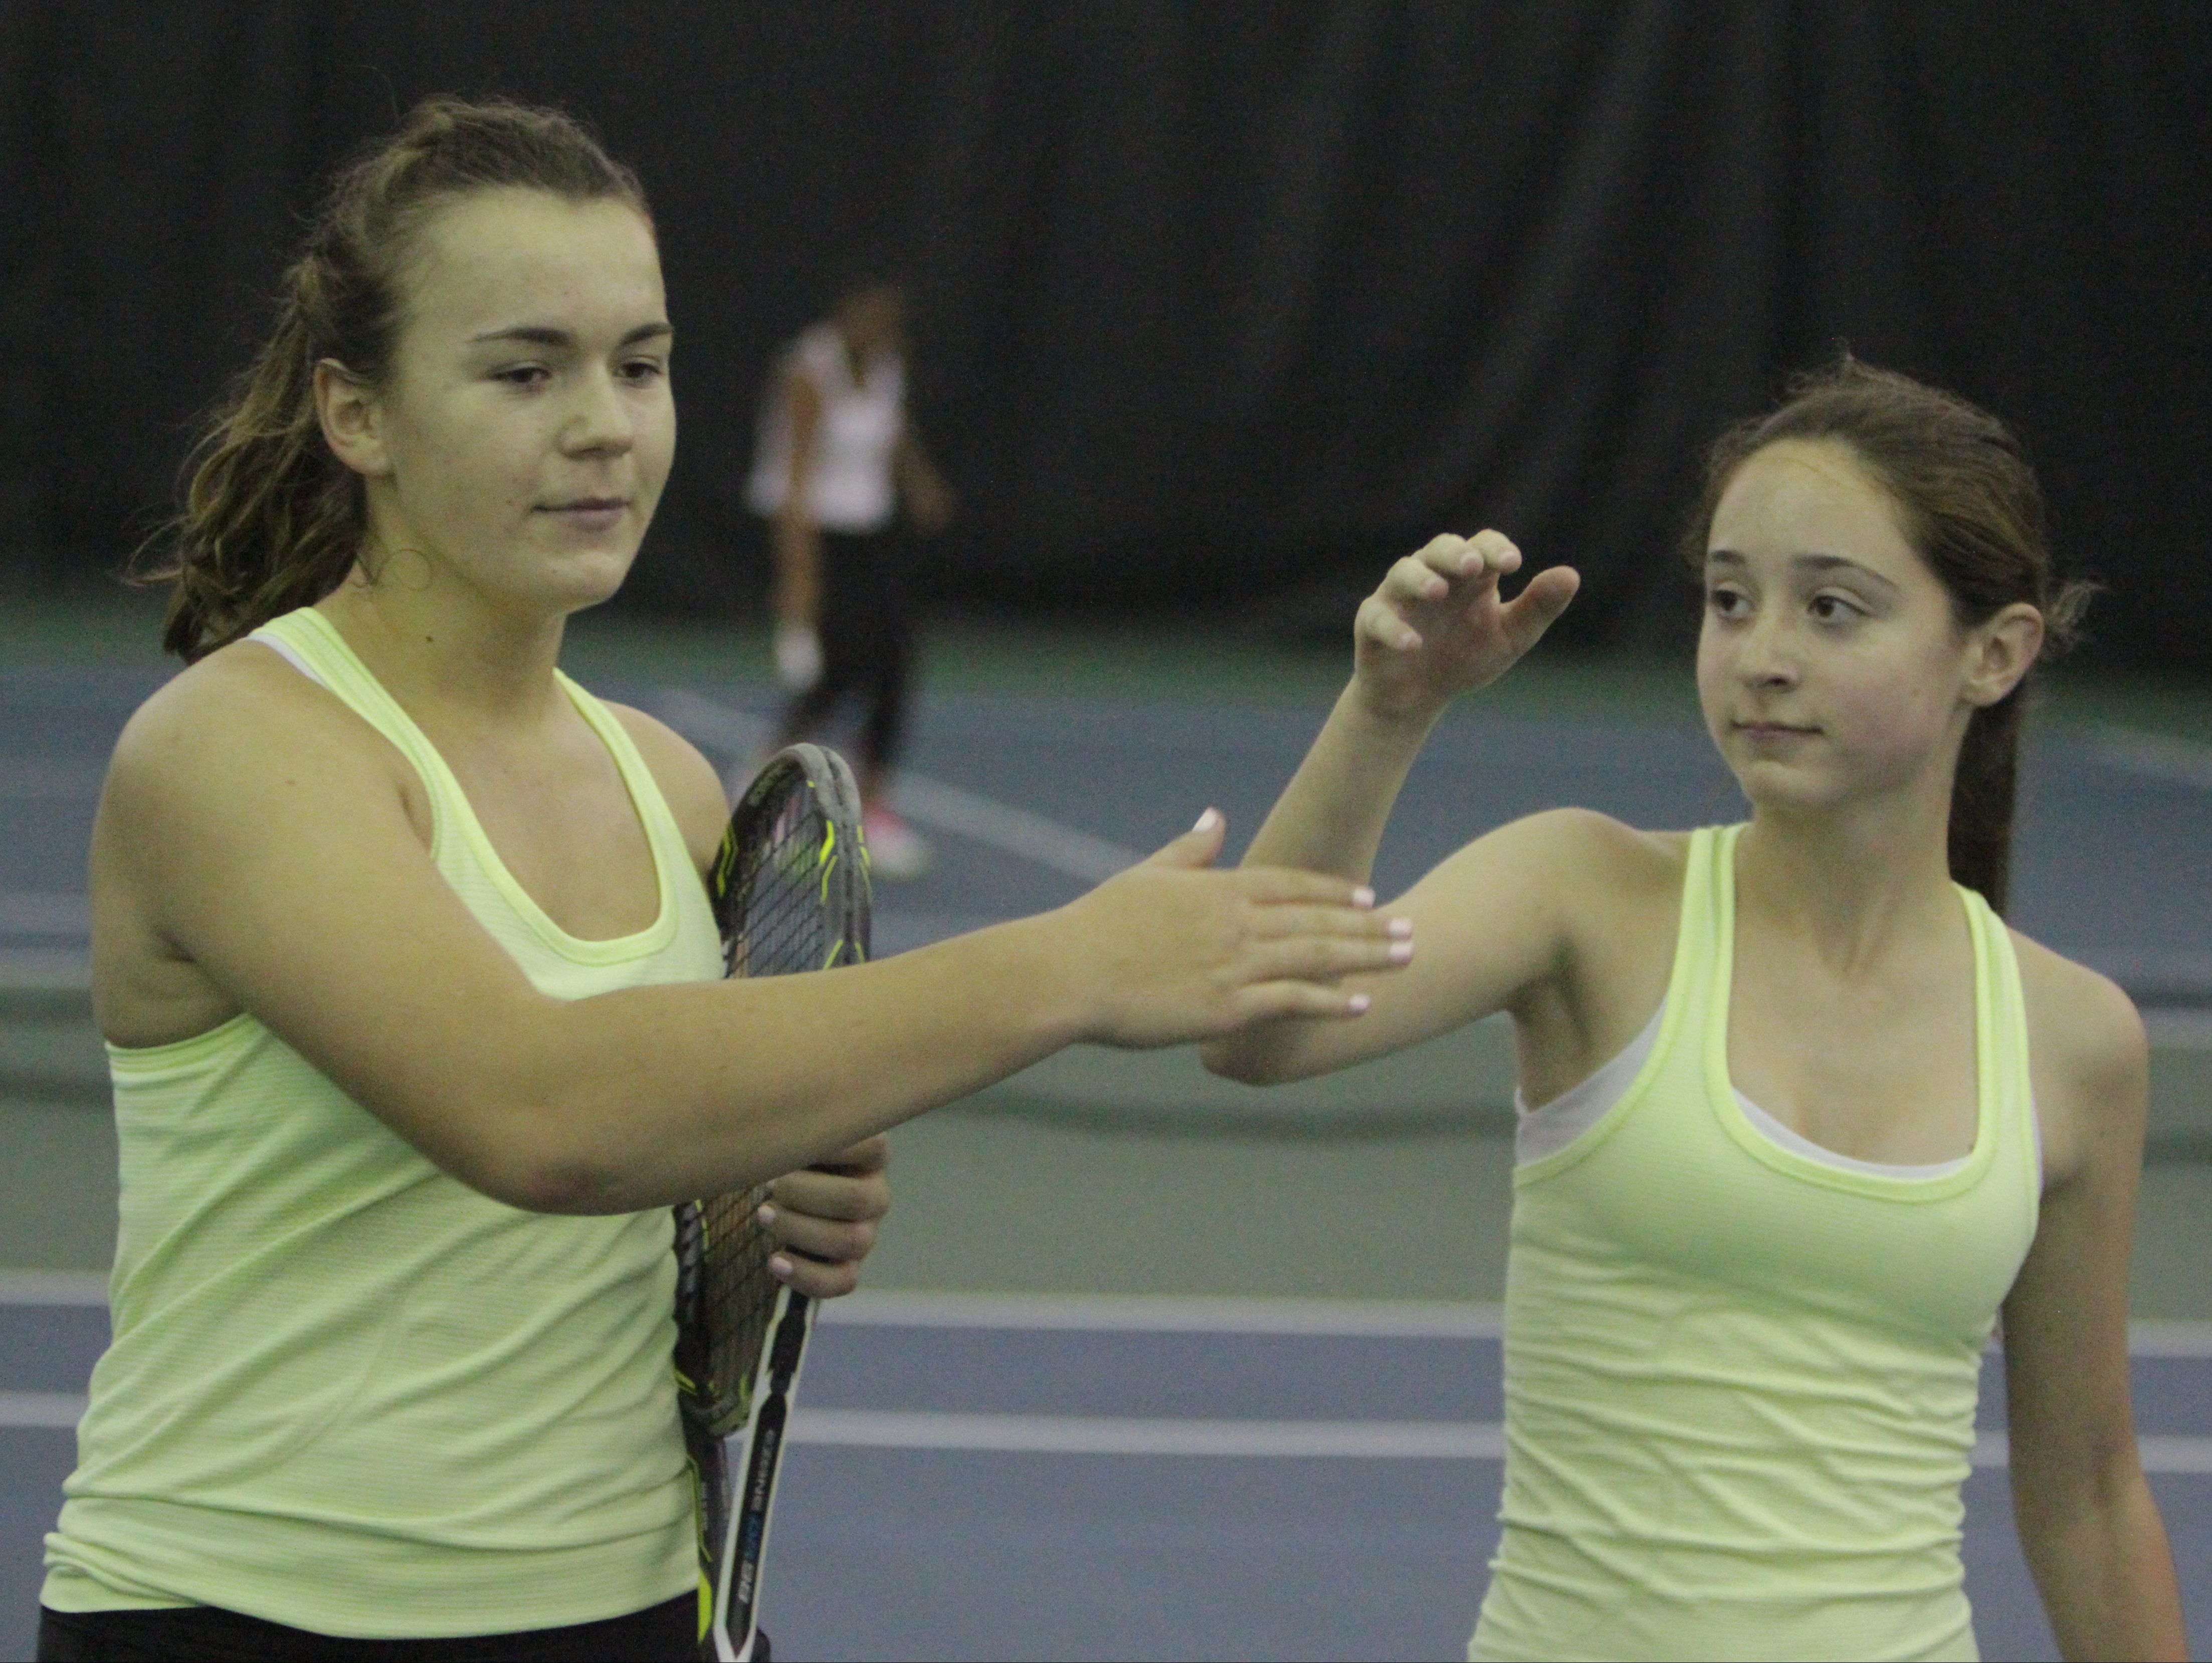 Clarkstown North's Martyna Czarnik (left) and Sydney Miller celebrate after winning a quarterfinal match at the New York State girls tennis tournament at Sound Shore Indoor Tennis in Port Chester on Sunday, Oct. 30th, 2016.